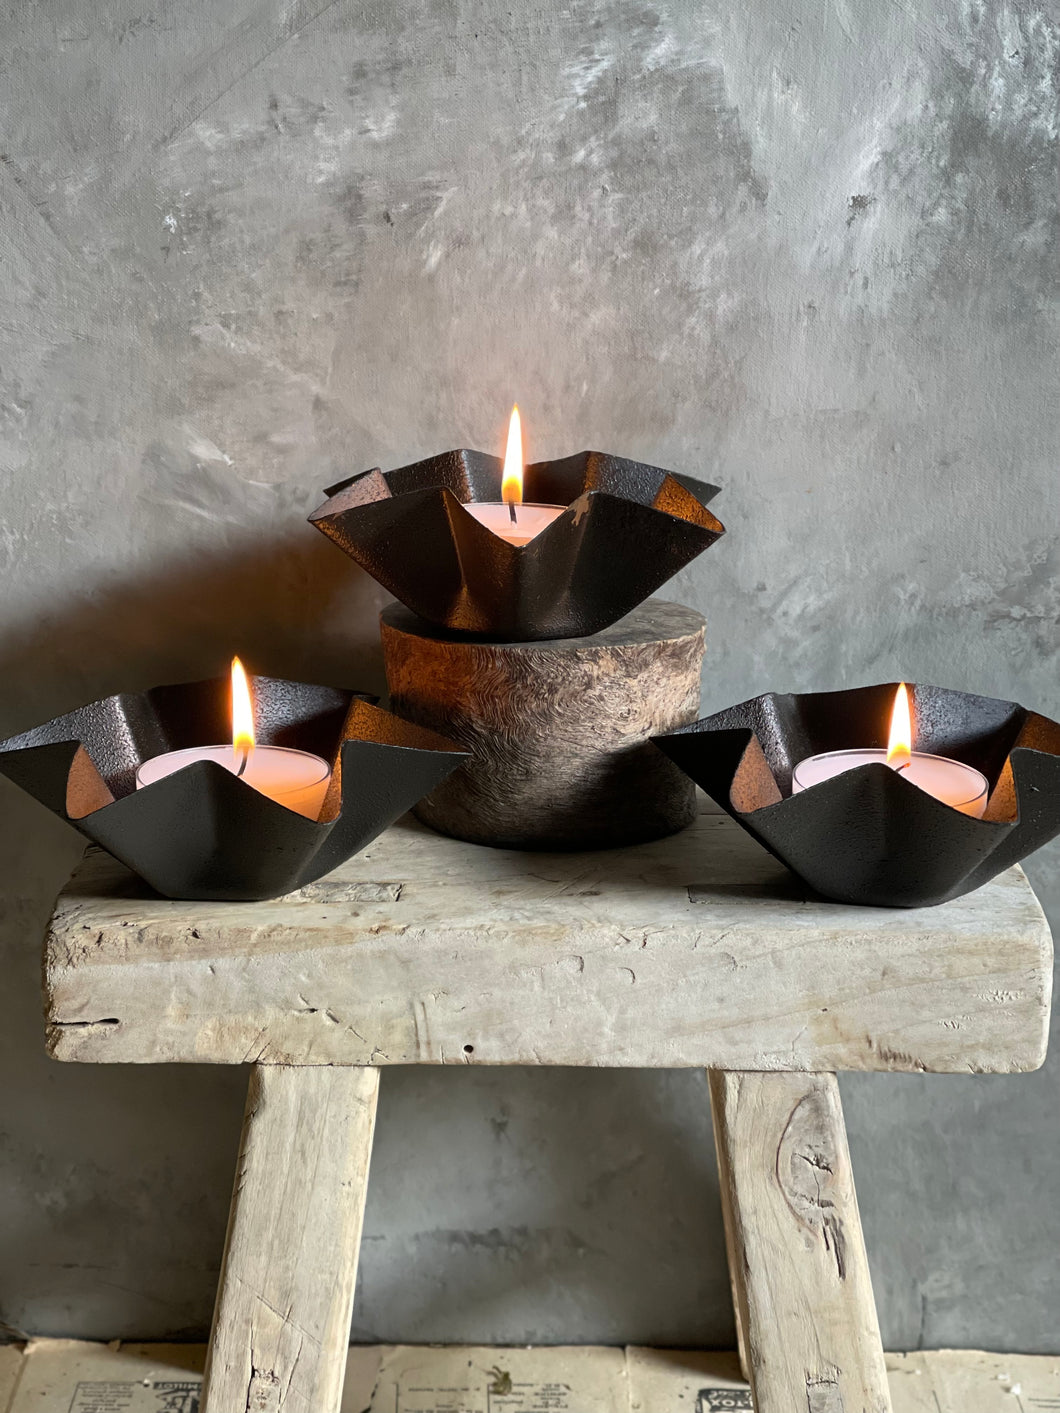 Rustic Black Star Shaped Candle Pan Hammered Finish.